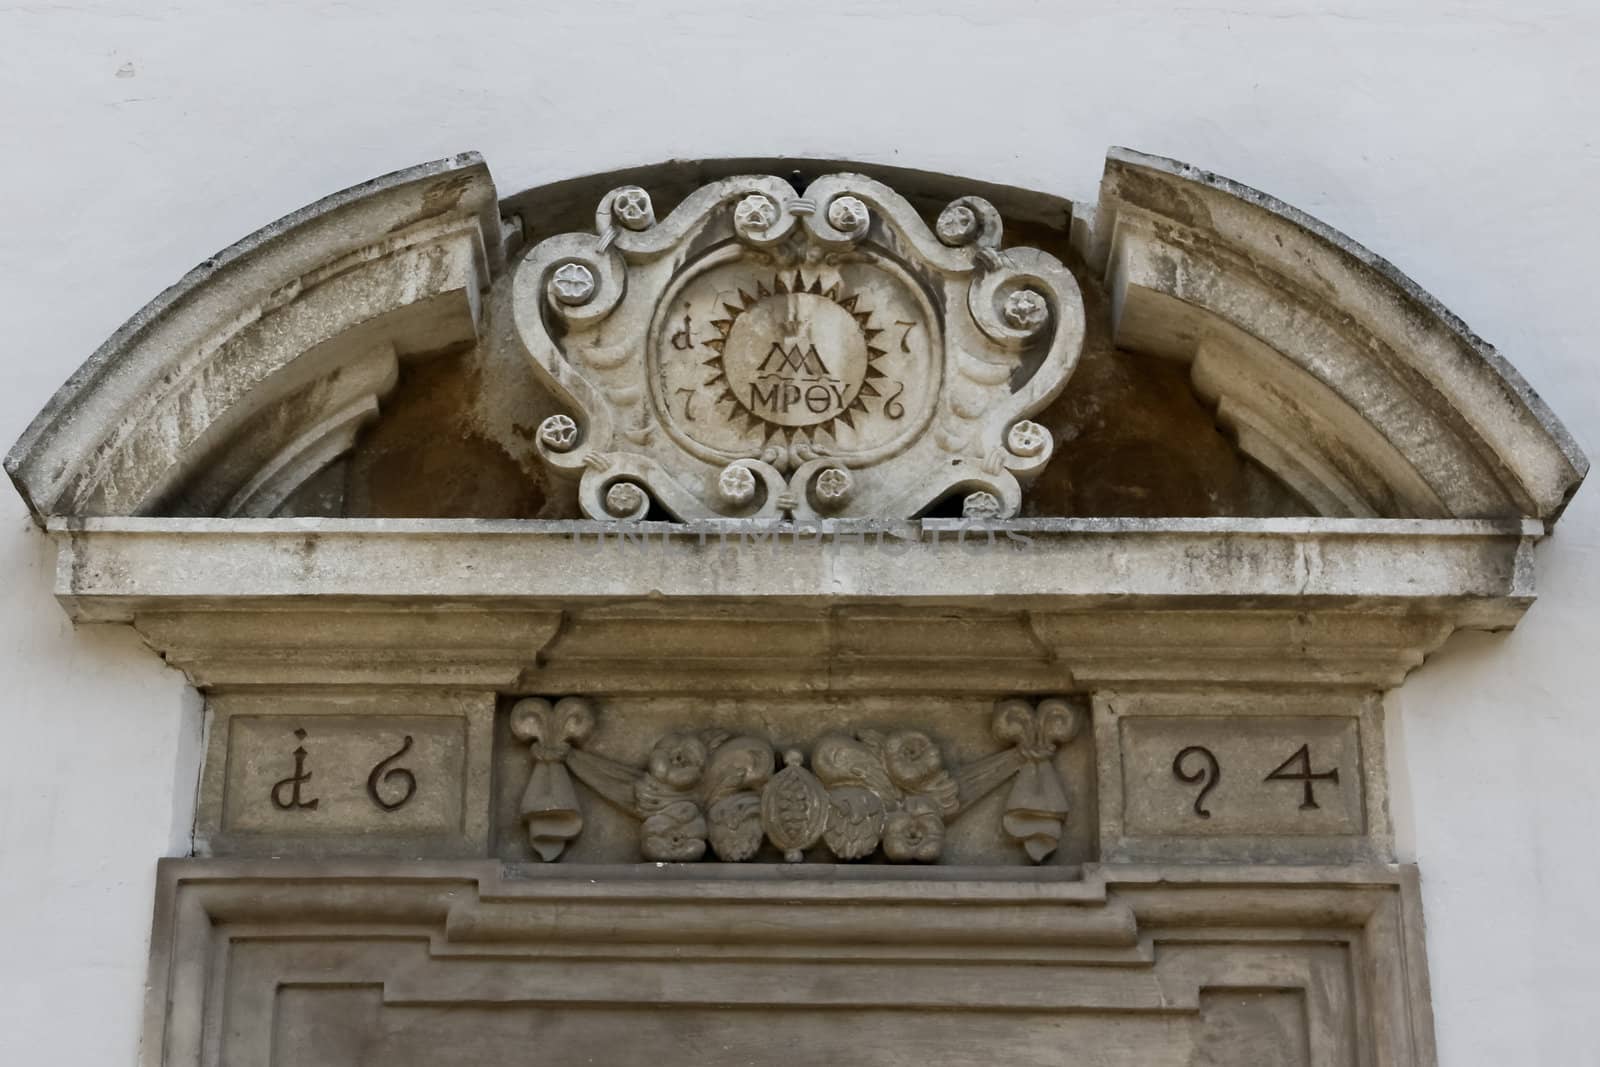 A detail of a door to a public catholic school in lower austria